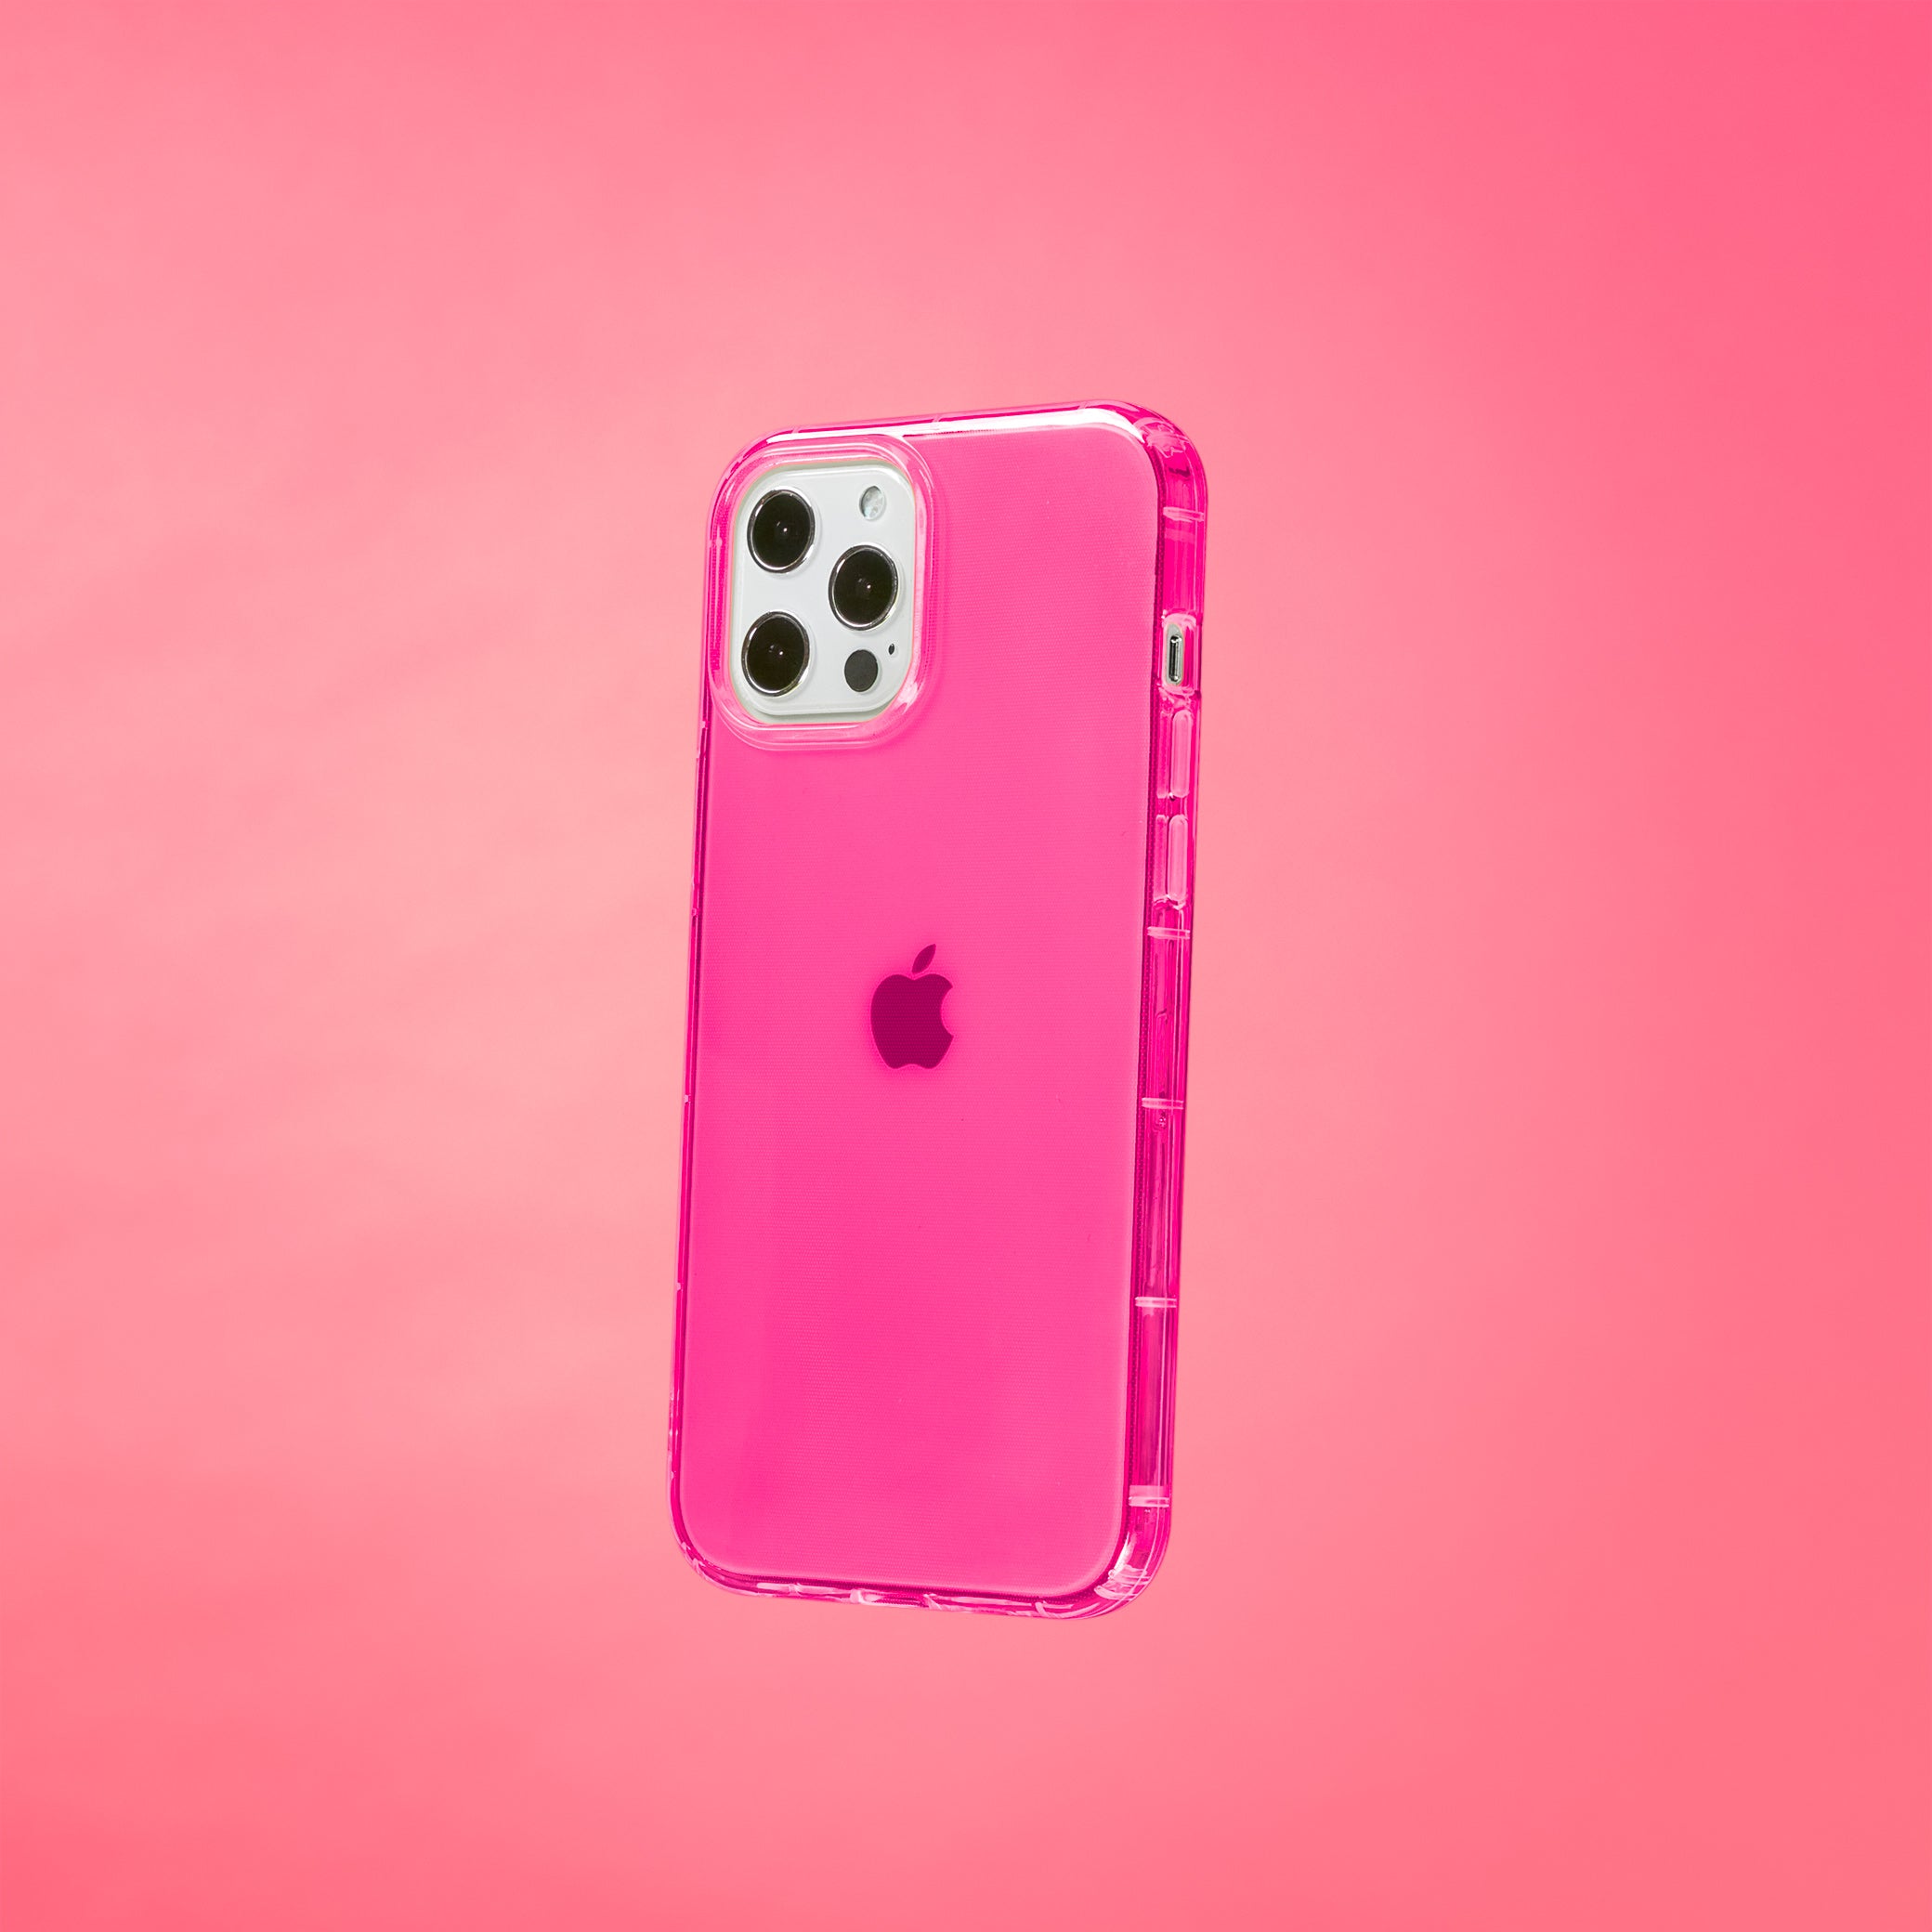 Highlighter Case for iPhone 12 Pro Max - Eye-Catching Hot Pink